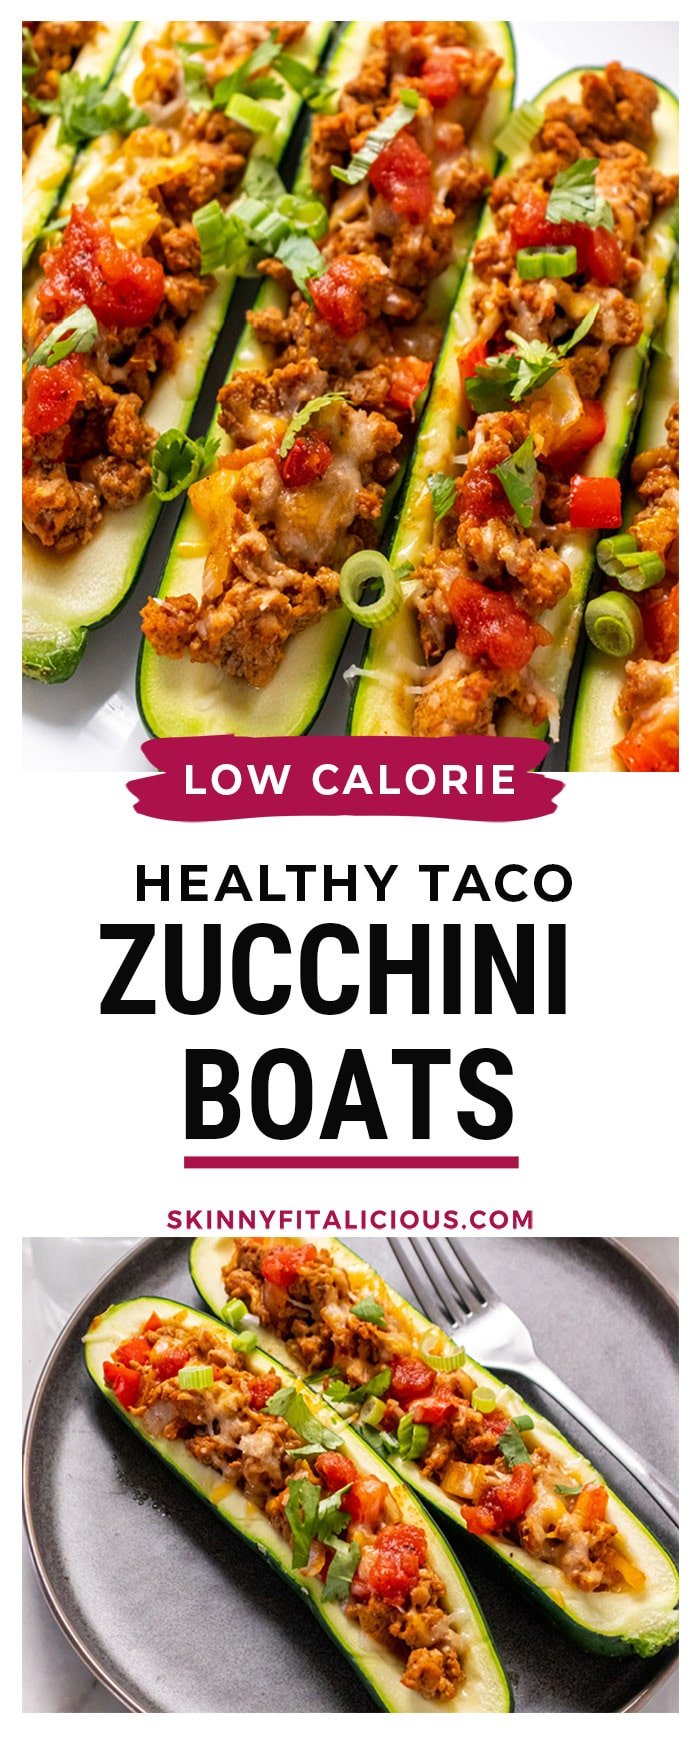 Healthy Zucchini Taco Boats made with ground turkey are low calorie and higher protein. A filling, protein and fiber filled meal that's easy and delicious! 